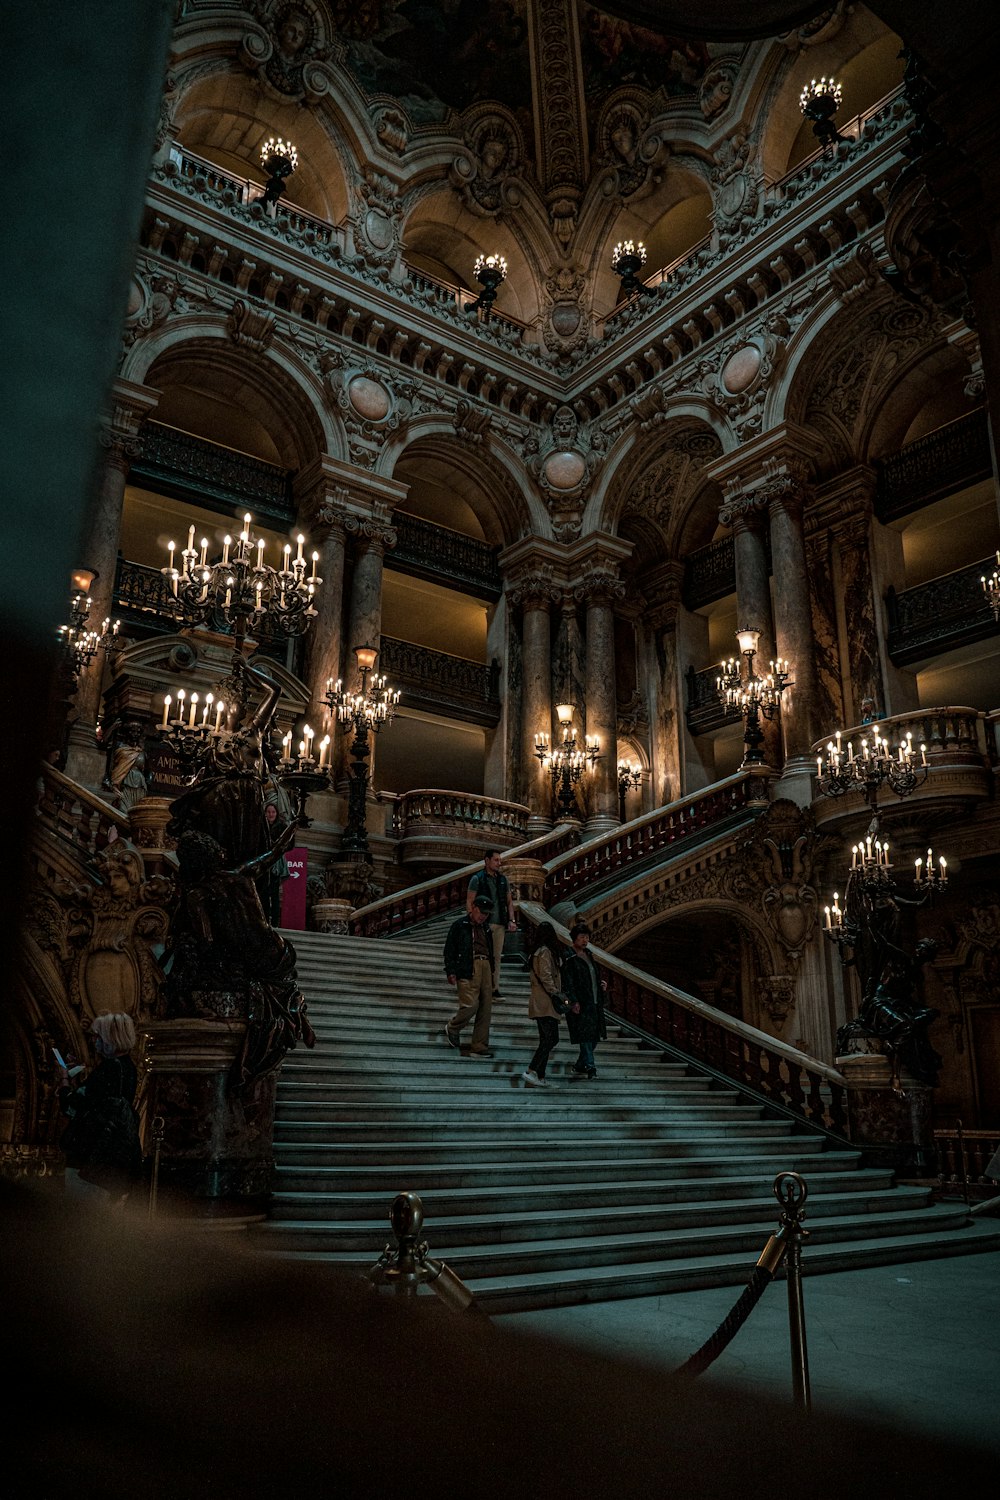 people standing on the stairs of a large ornate building